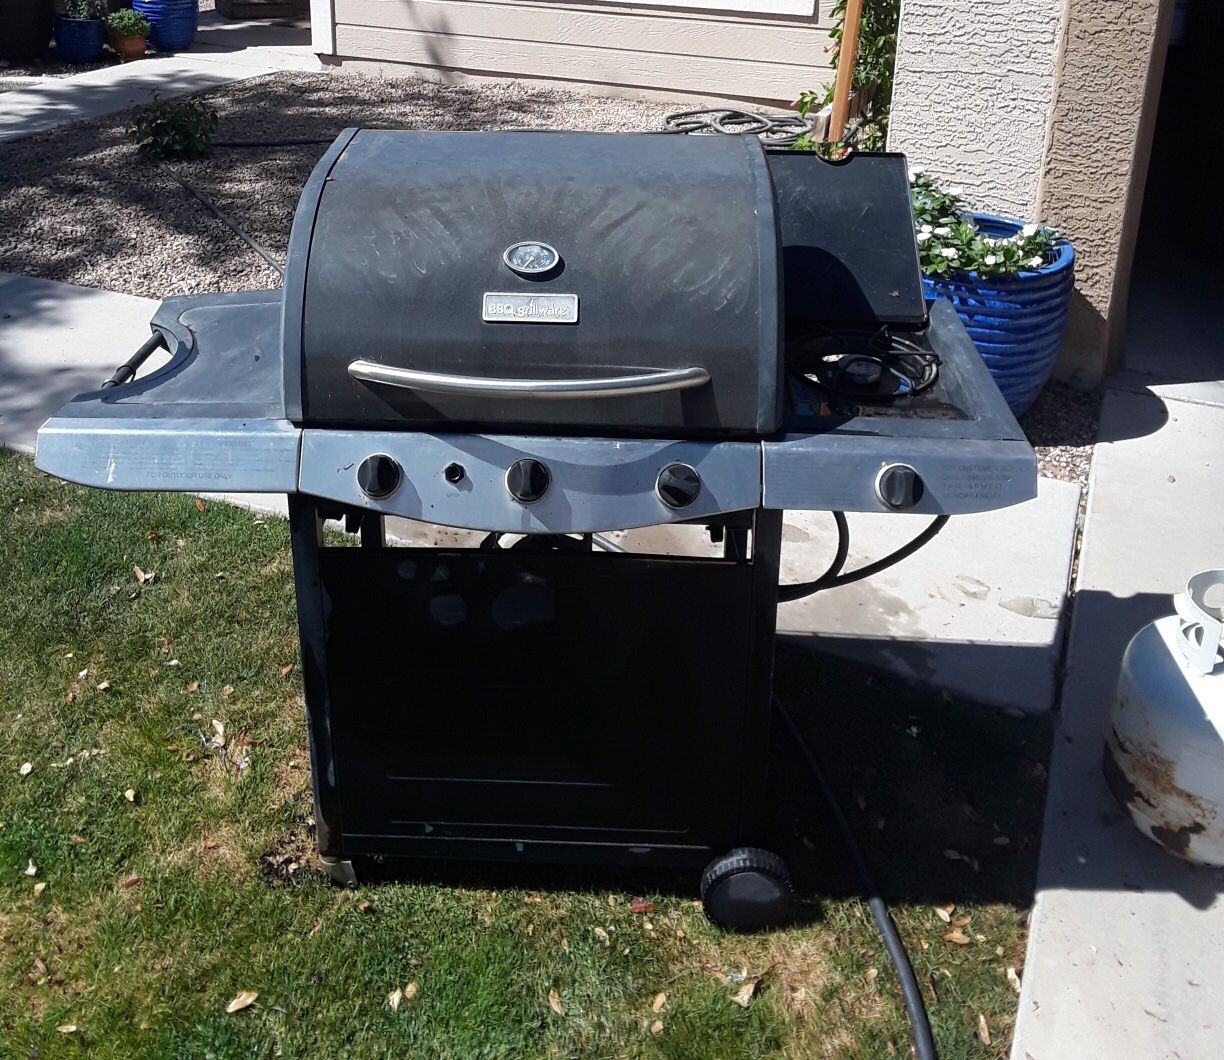 BBQ Grill and Propane Tanks